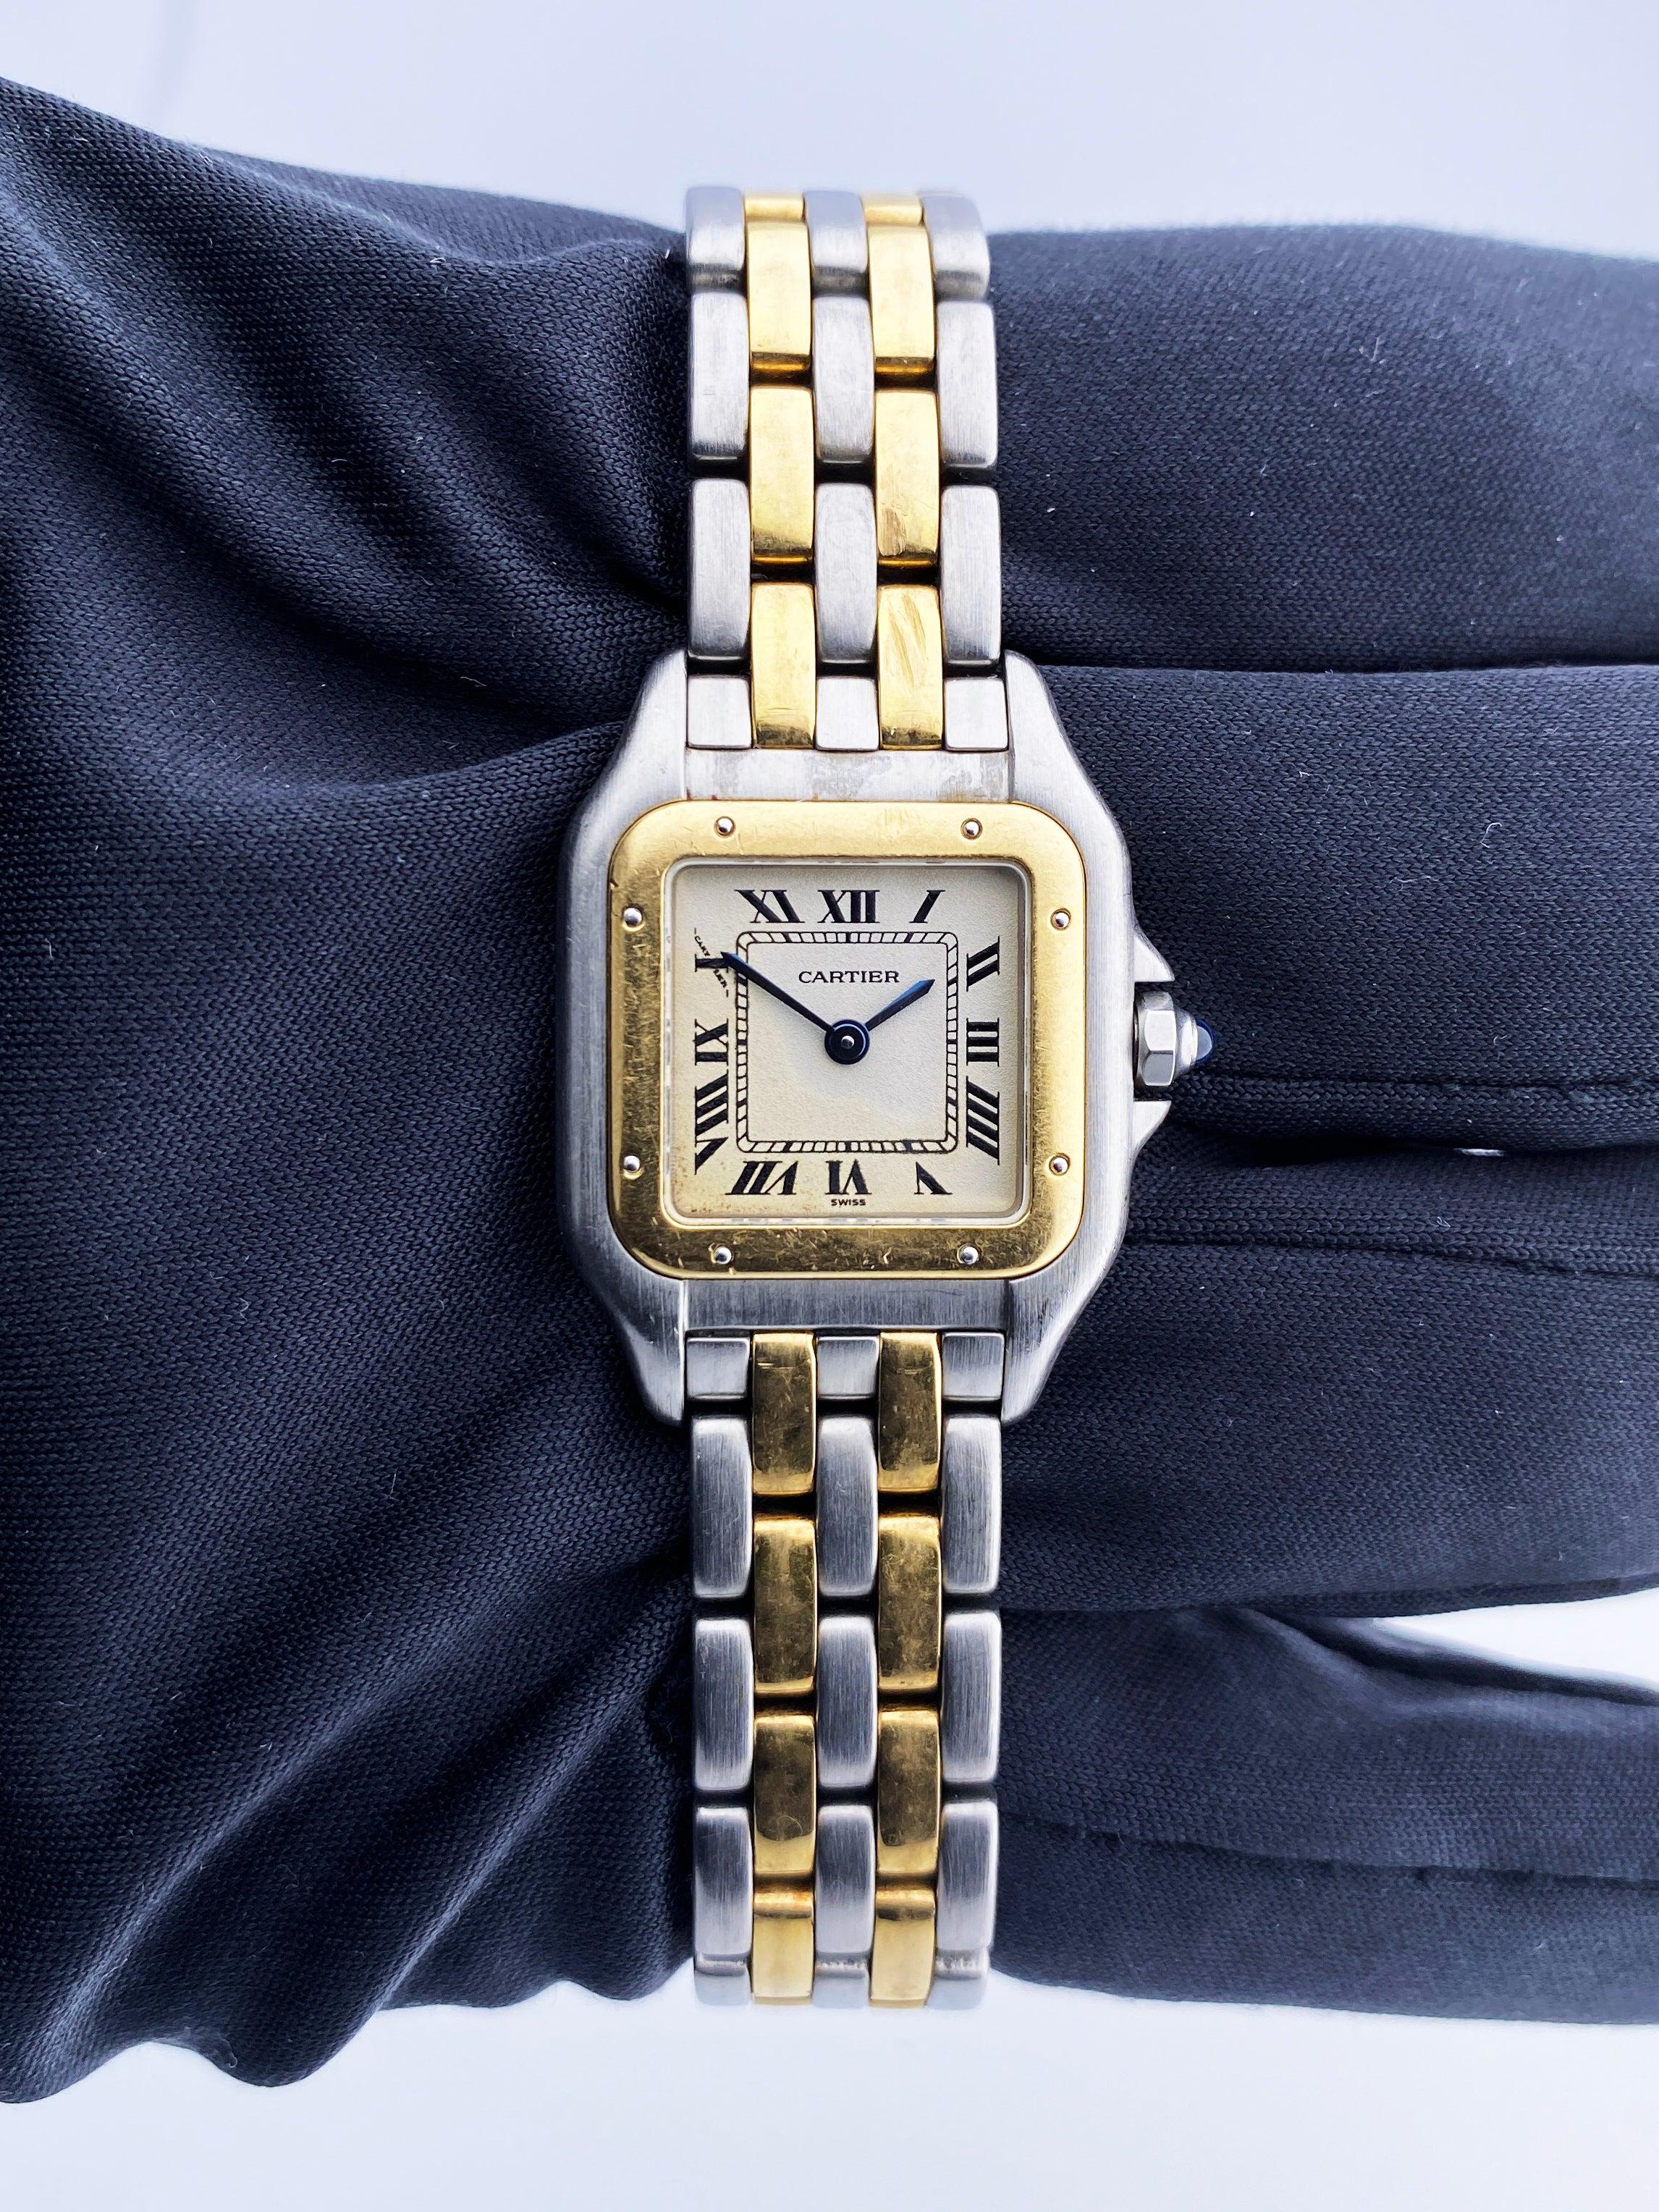 Cartier Panthere 1120 Ladies Watch. 22mm stainless steel case. 18K yellow gold bezel. Off-White dial with blue steel hands and Roman numeral hour markers. Minute markers on the inner dial. Stainless steel & two rows of 18K yellow gold  bracelet with